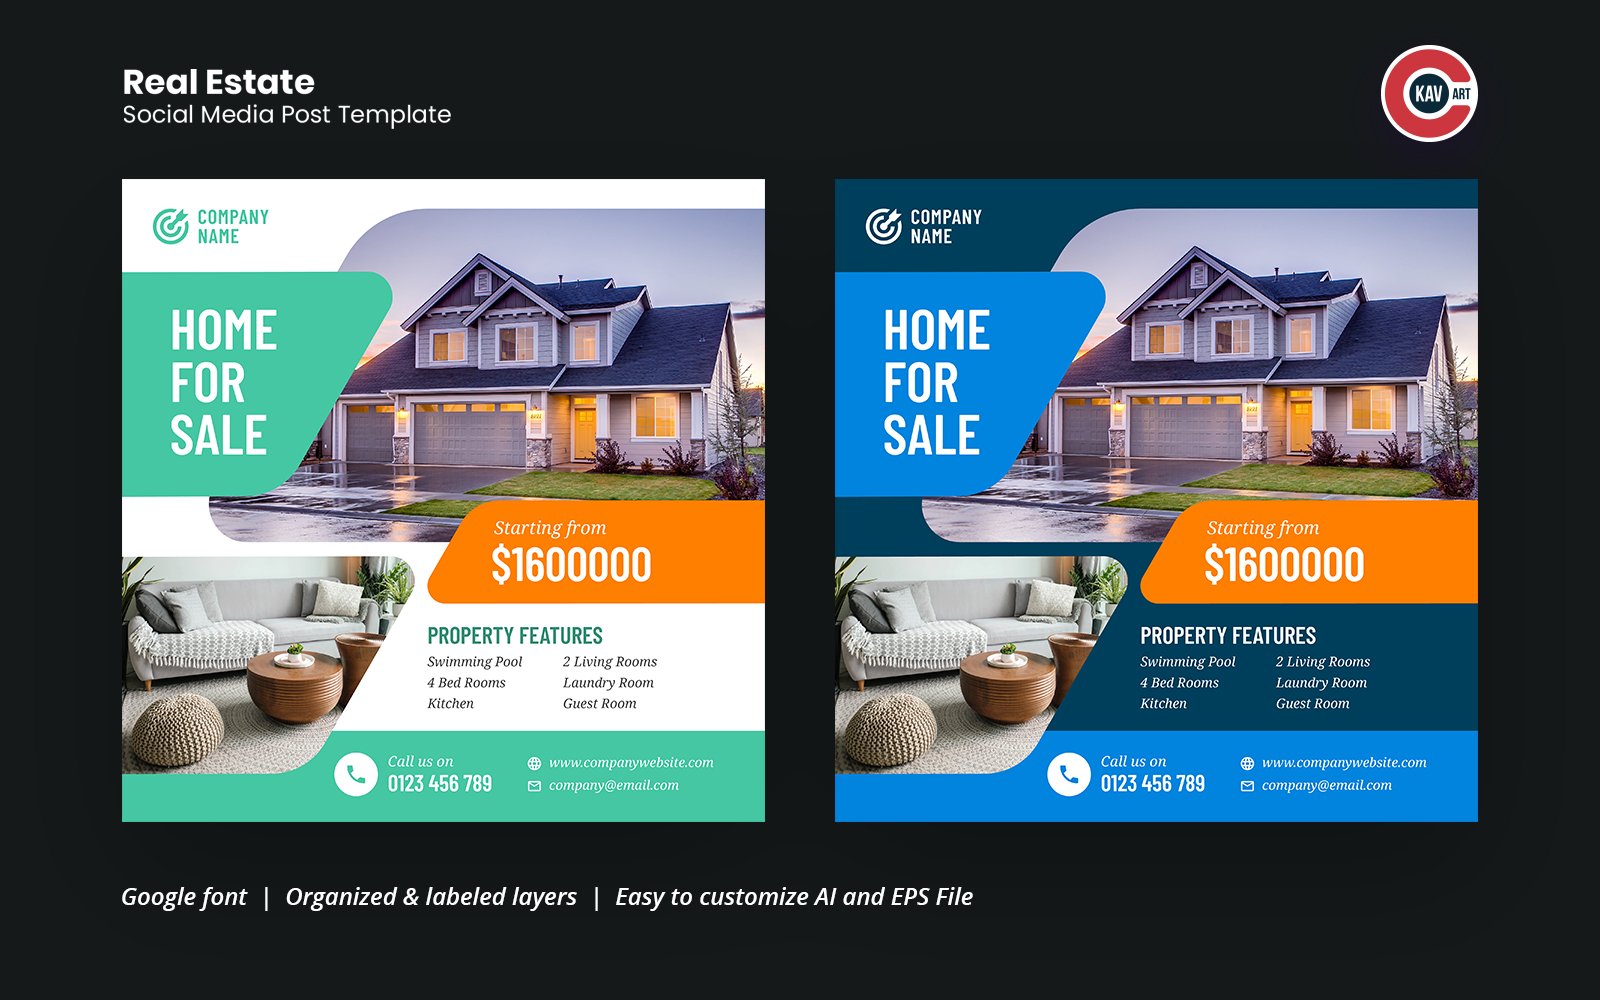 Property For Sale Social Media Post Template